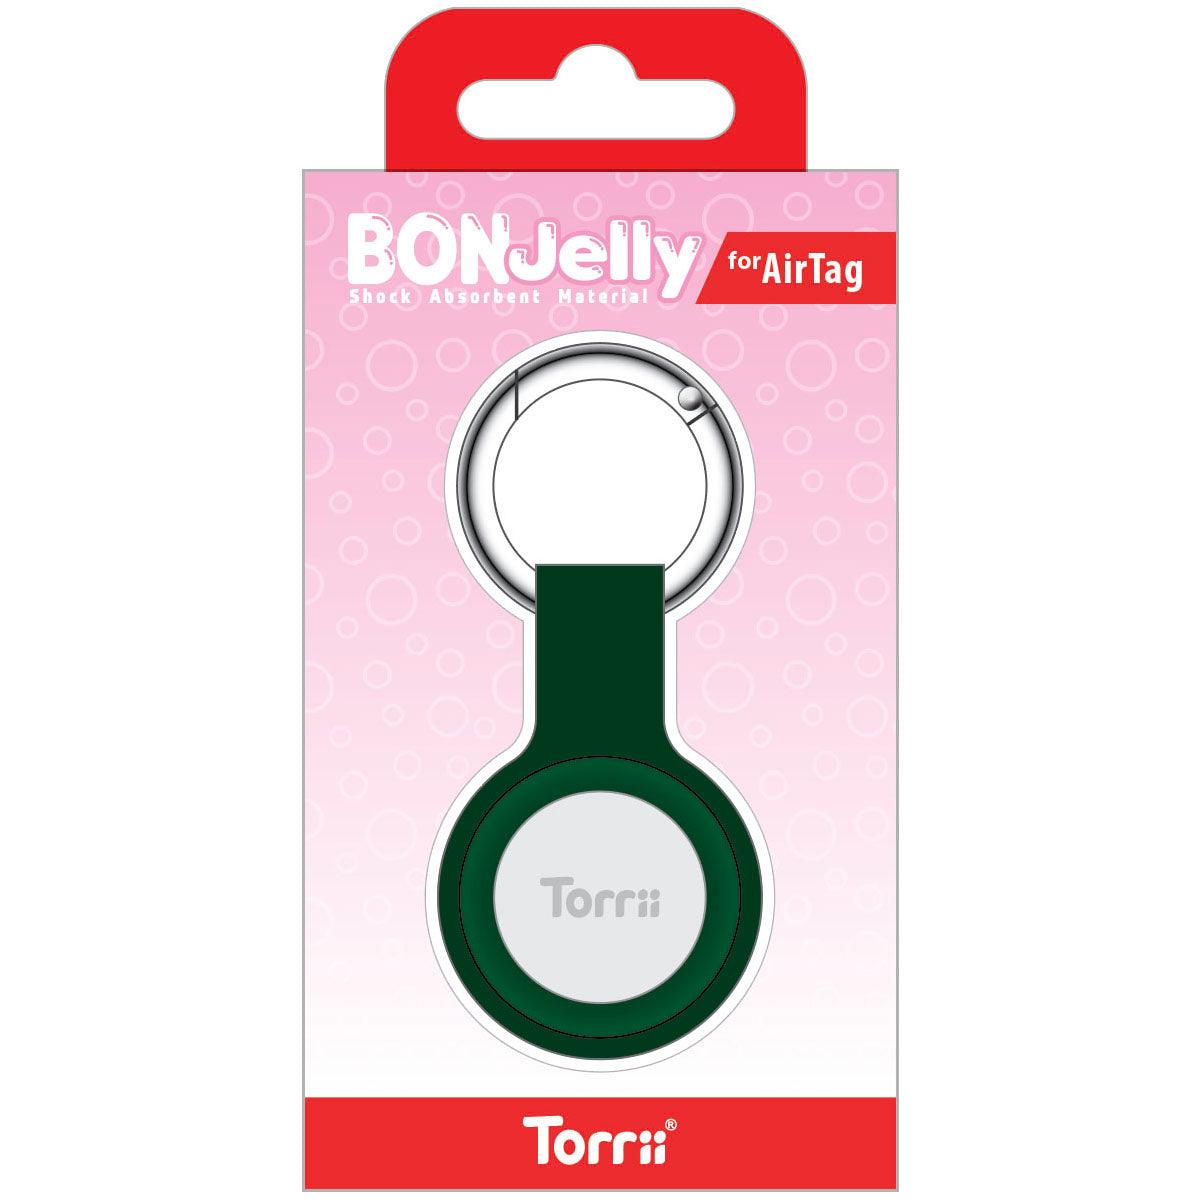 Torrii Bonjelly Silicone Key Ring For Apple Airtag - Green